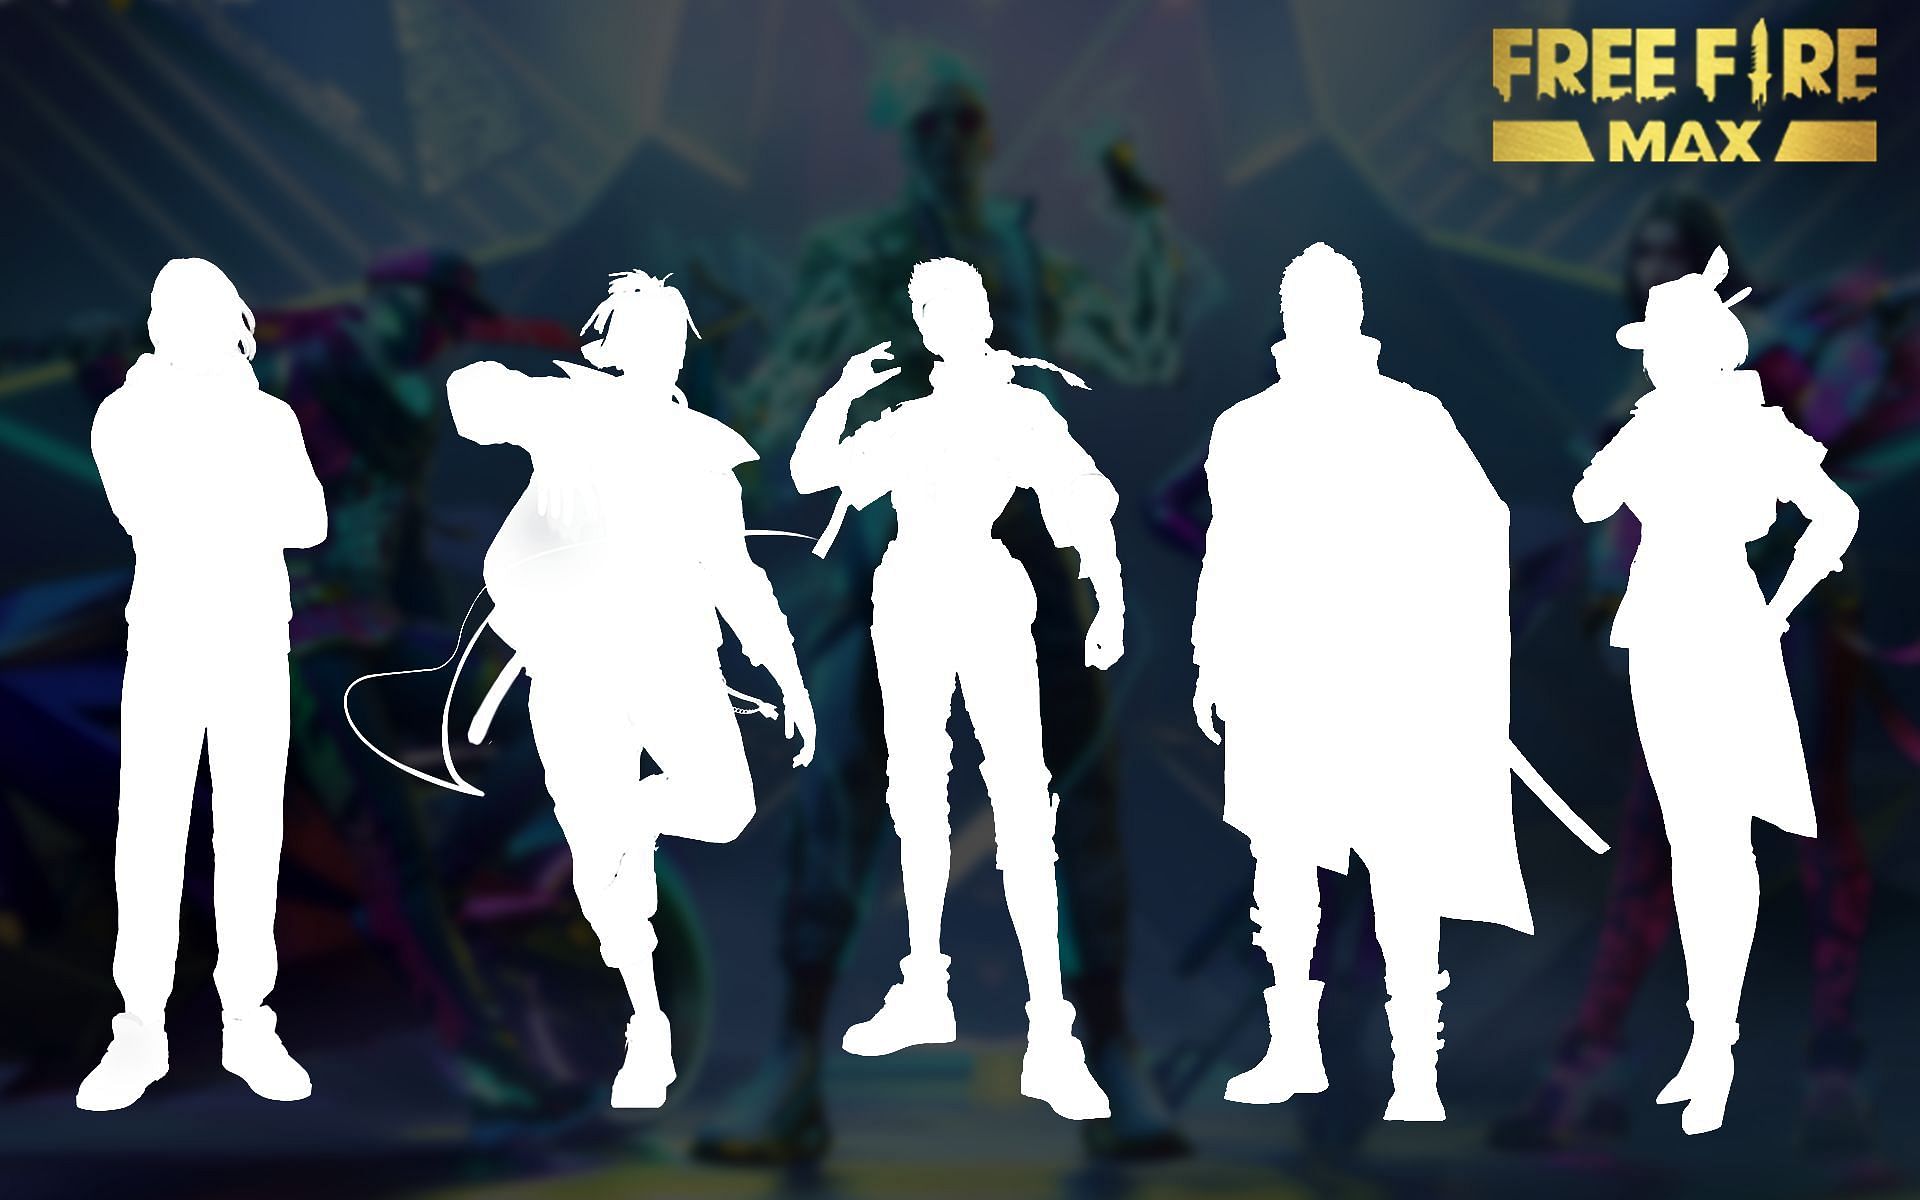 Free Fire MAX characters that would be suitable for the Clash Squad mode (Image via Sportskeeda)